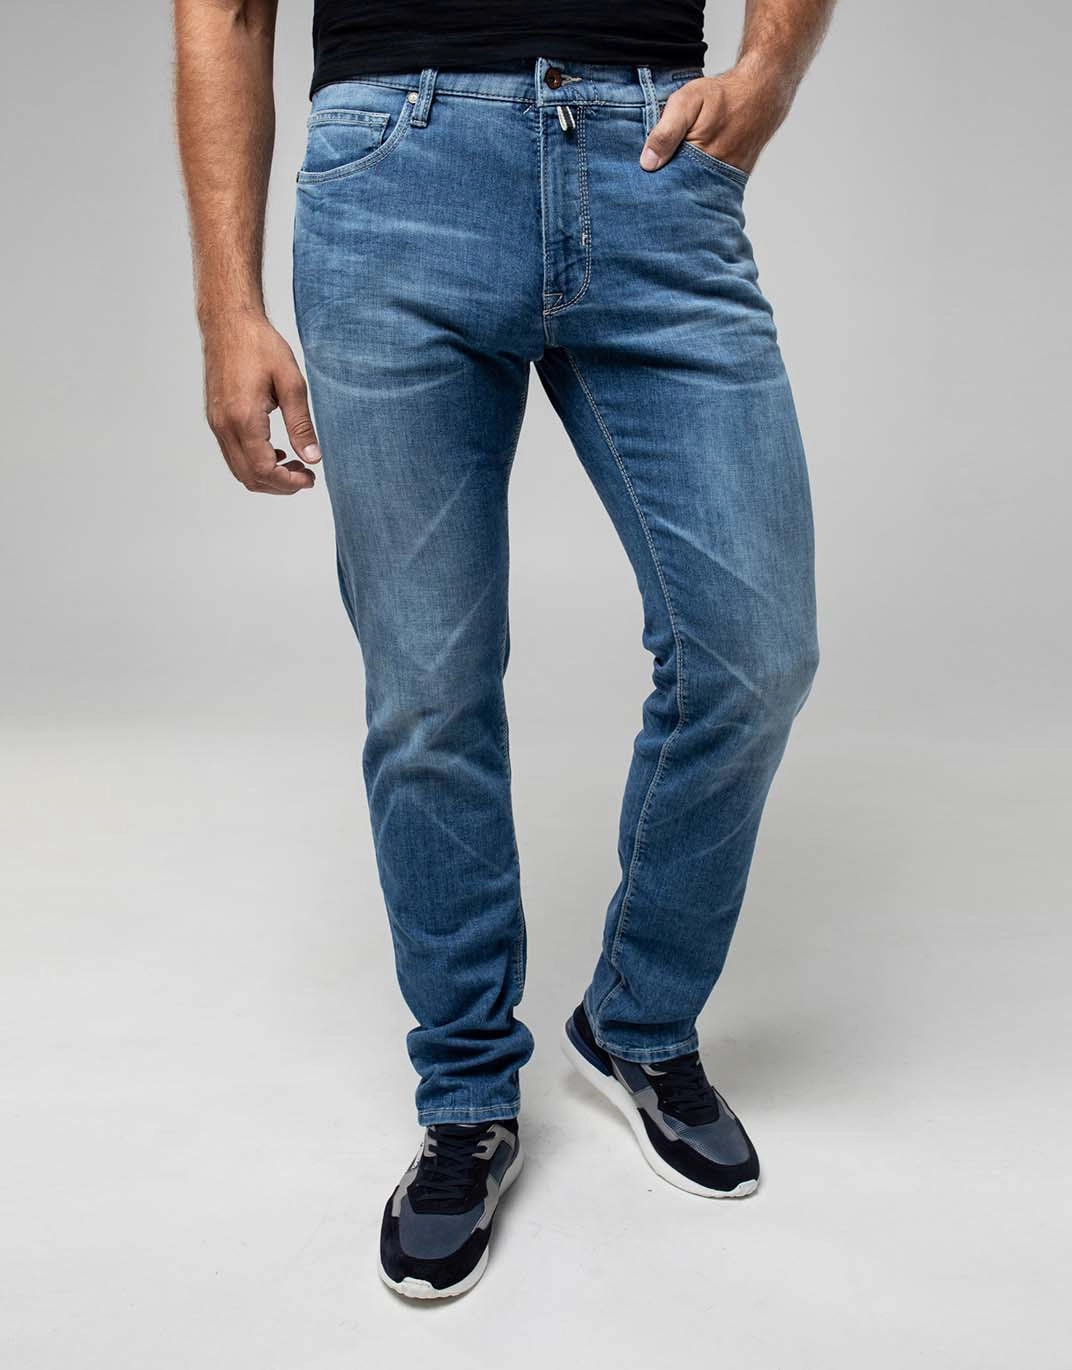 exegese Aanbeveling Ongeschikt ⏩Pierre Cardin jeans from the Art & Craft collection in distressed blue  952/02/3003 ᐈ Price 3173 UAH ᐈ Buy in the online store Pierre Cardin